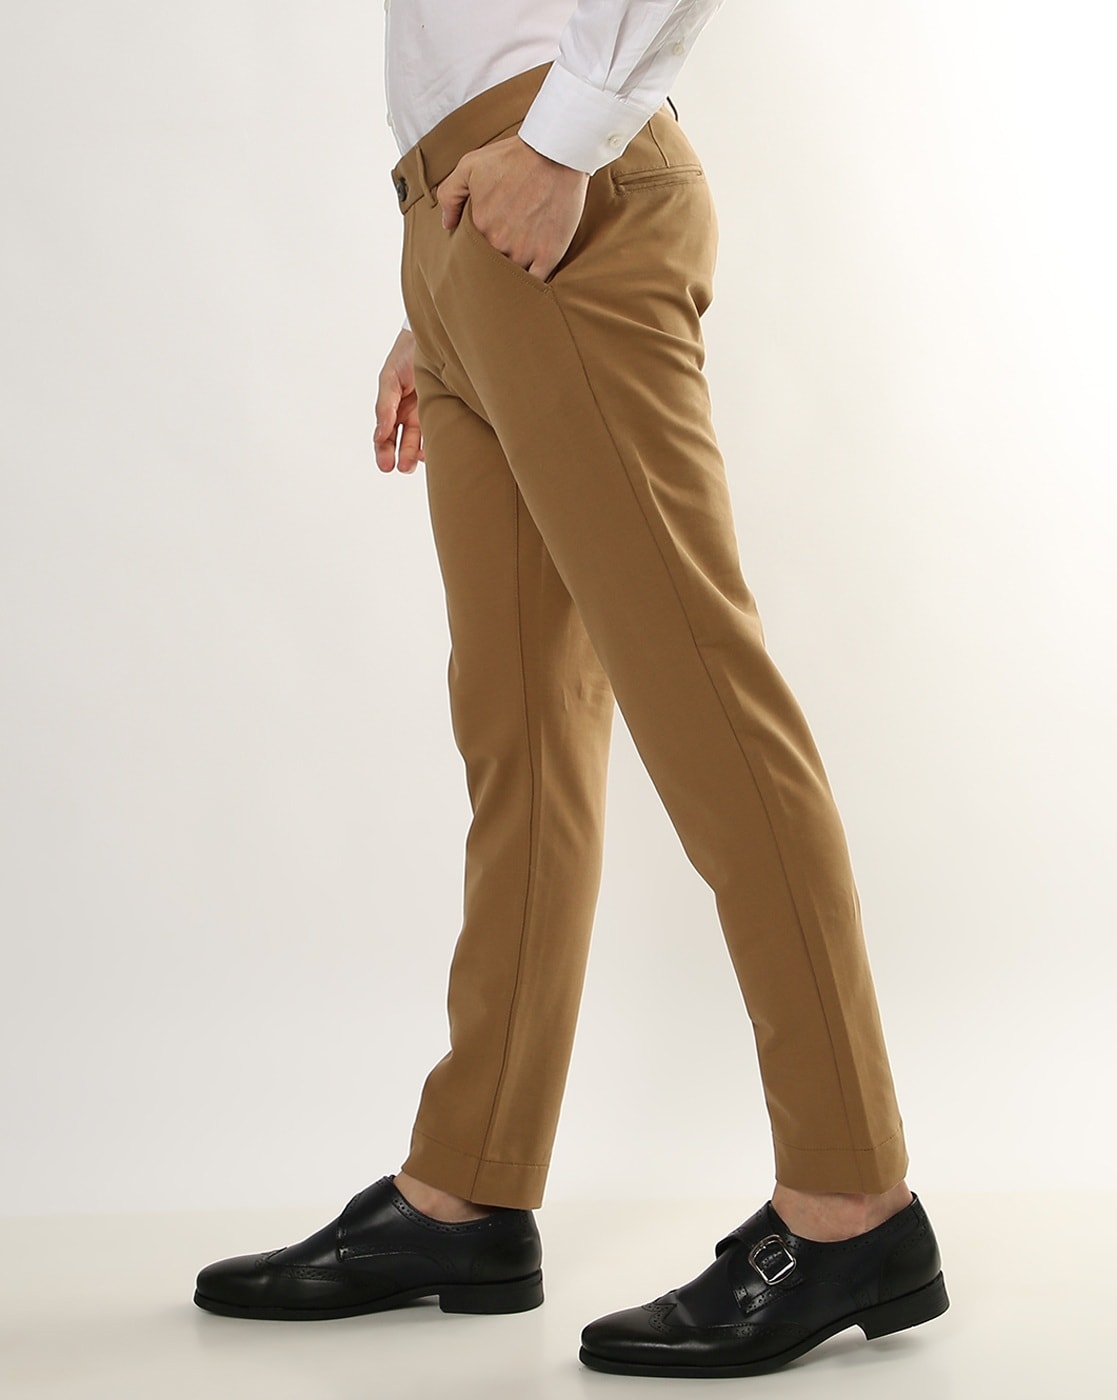 18 Best Mens Khaki Pants To Complete Your Wardrobe in 2023  FashionBeans